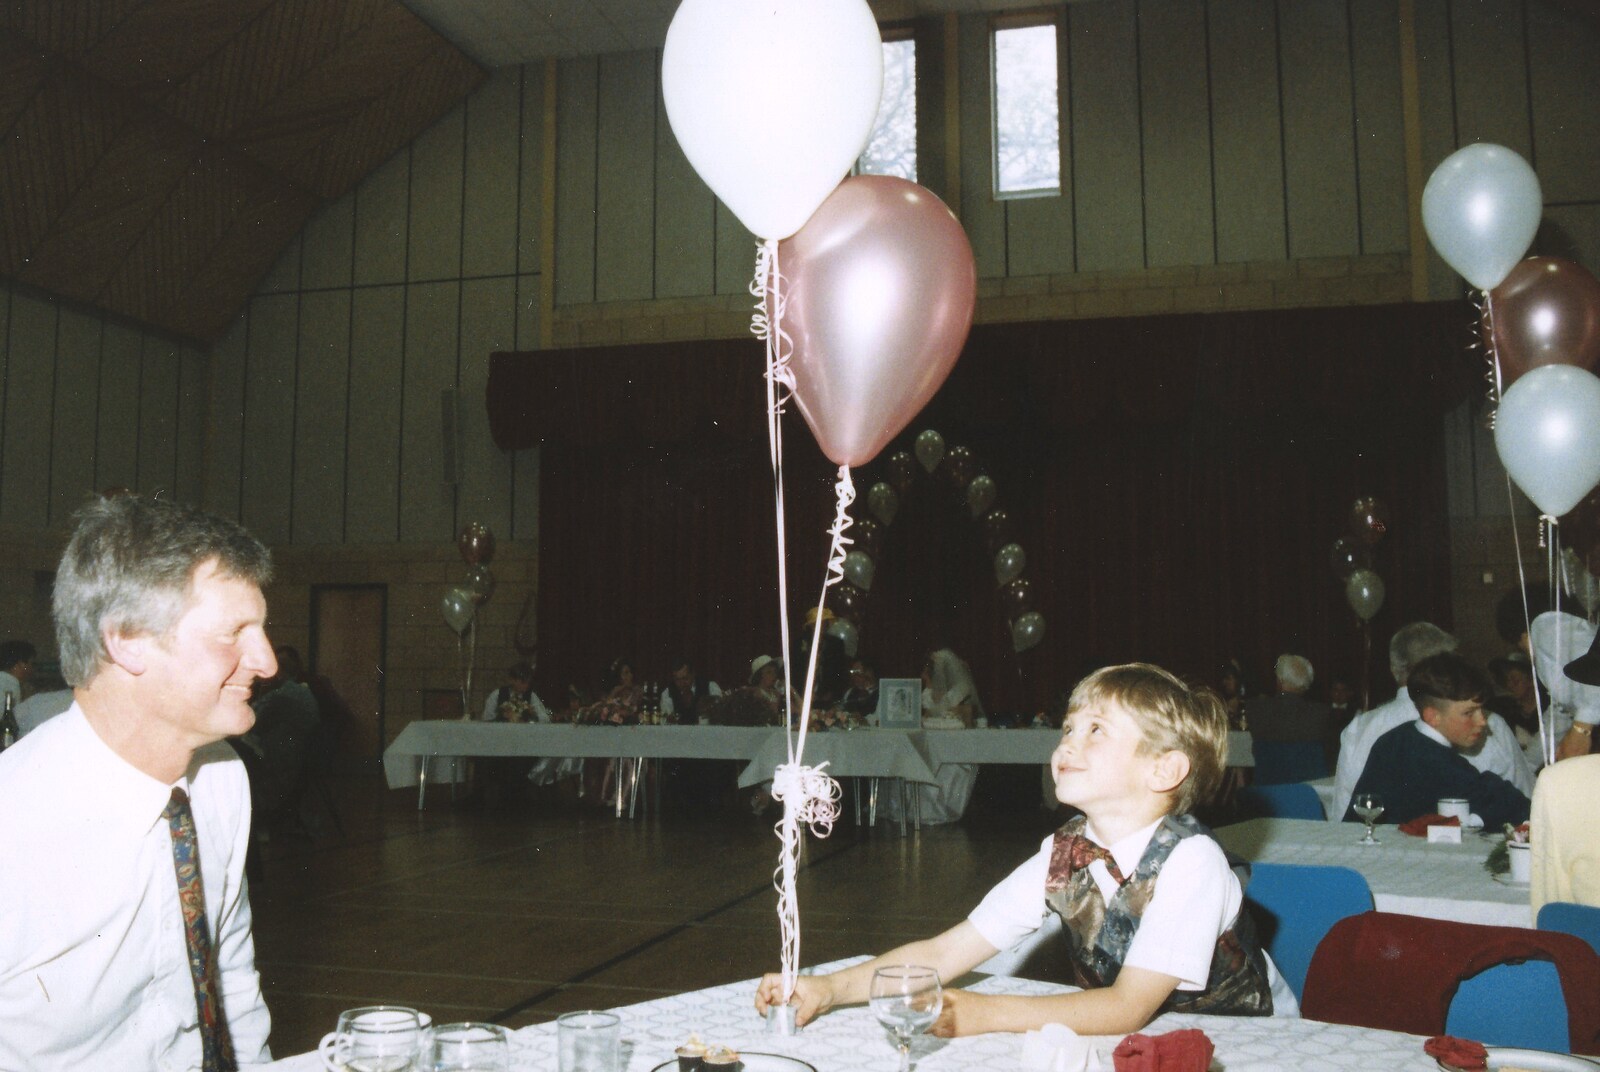 A boy with balloons from Debbie's Wedding, Suffolk - 12th June 1999